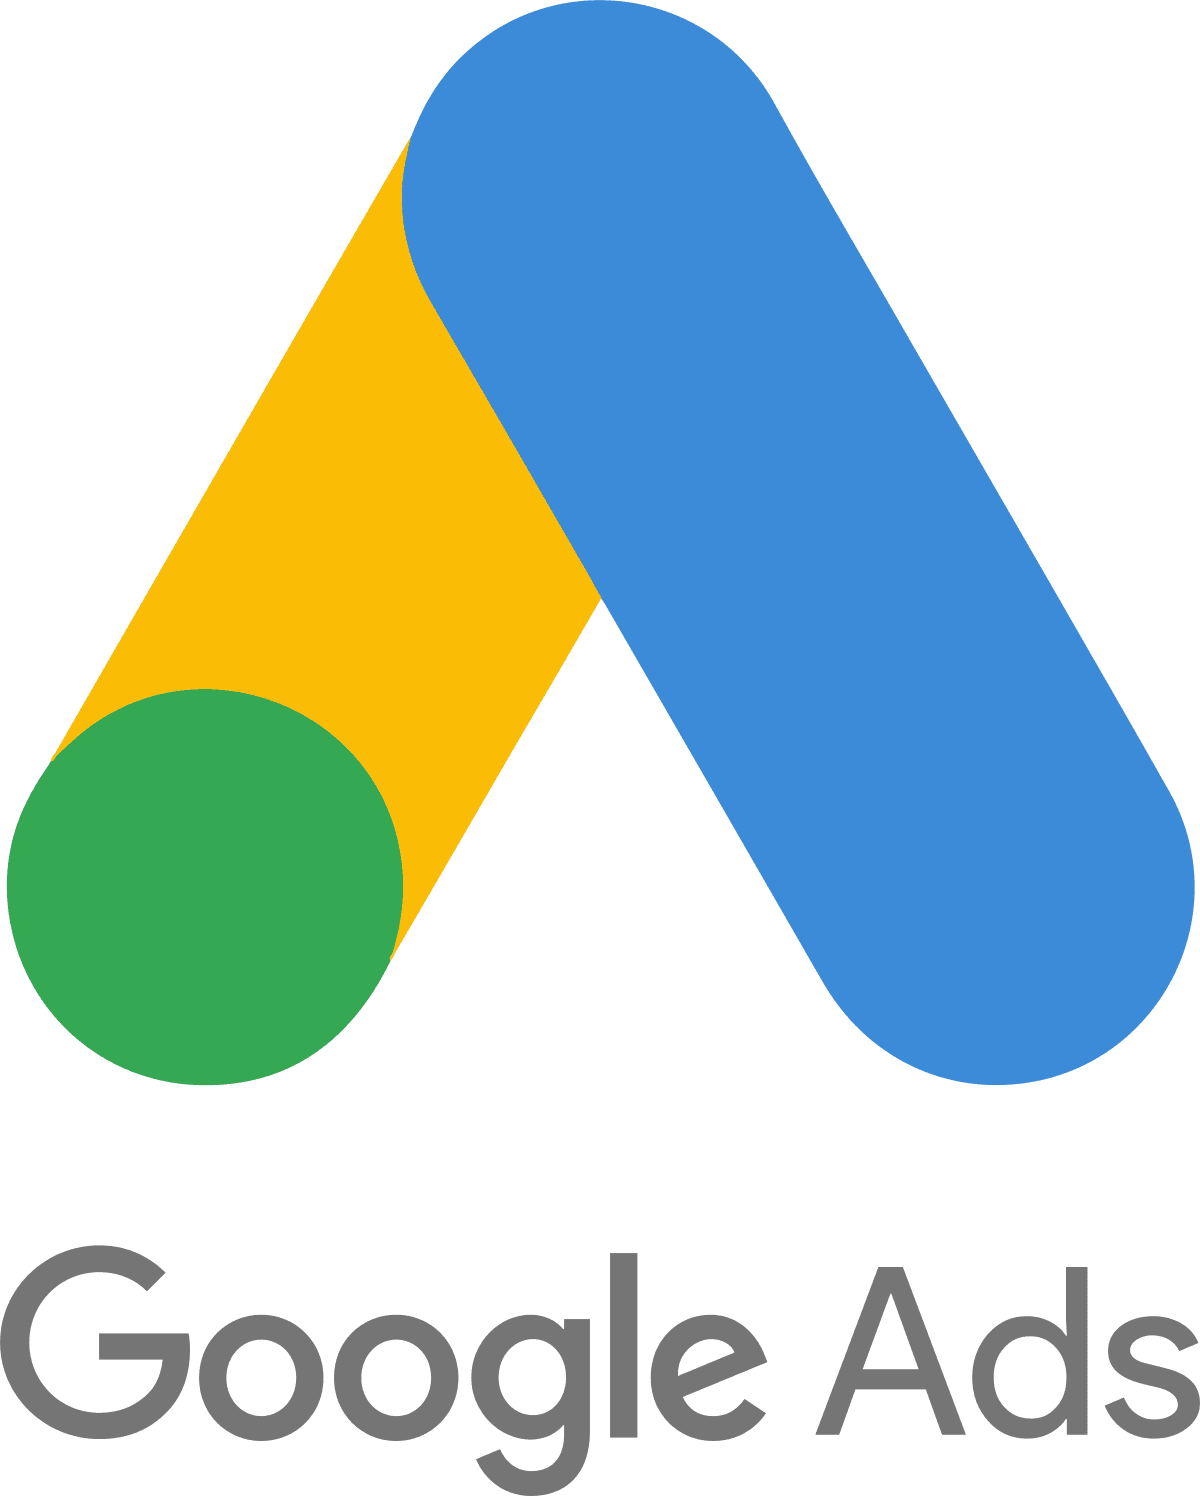 Google Adwords Alternative - How to Use Web Push Notifications as Alternatives for High CPC Ads